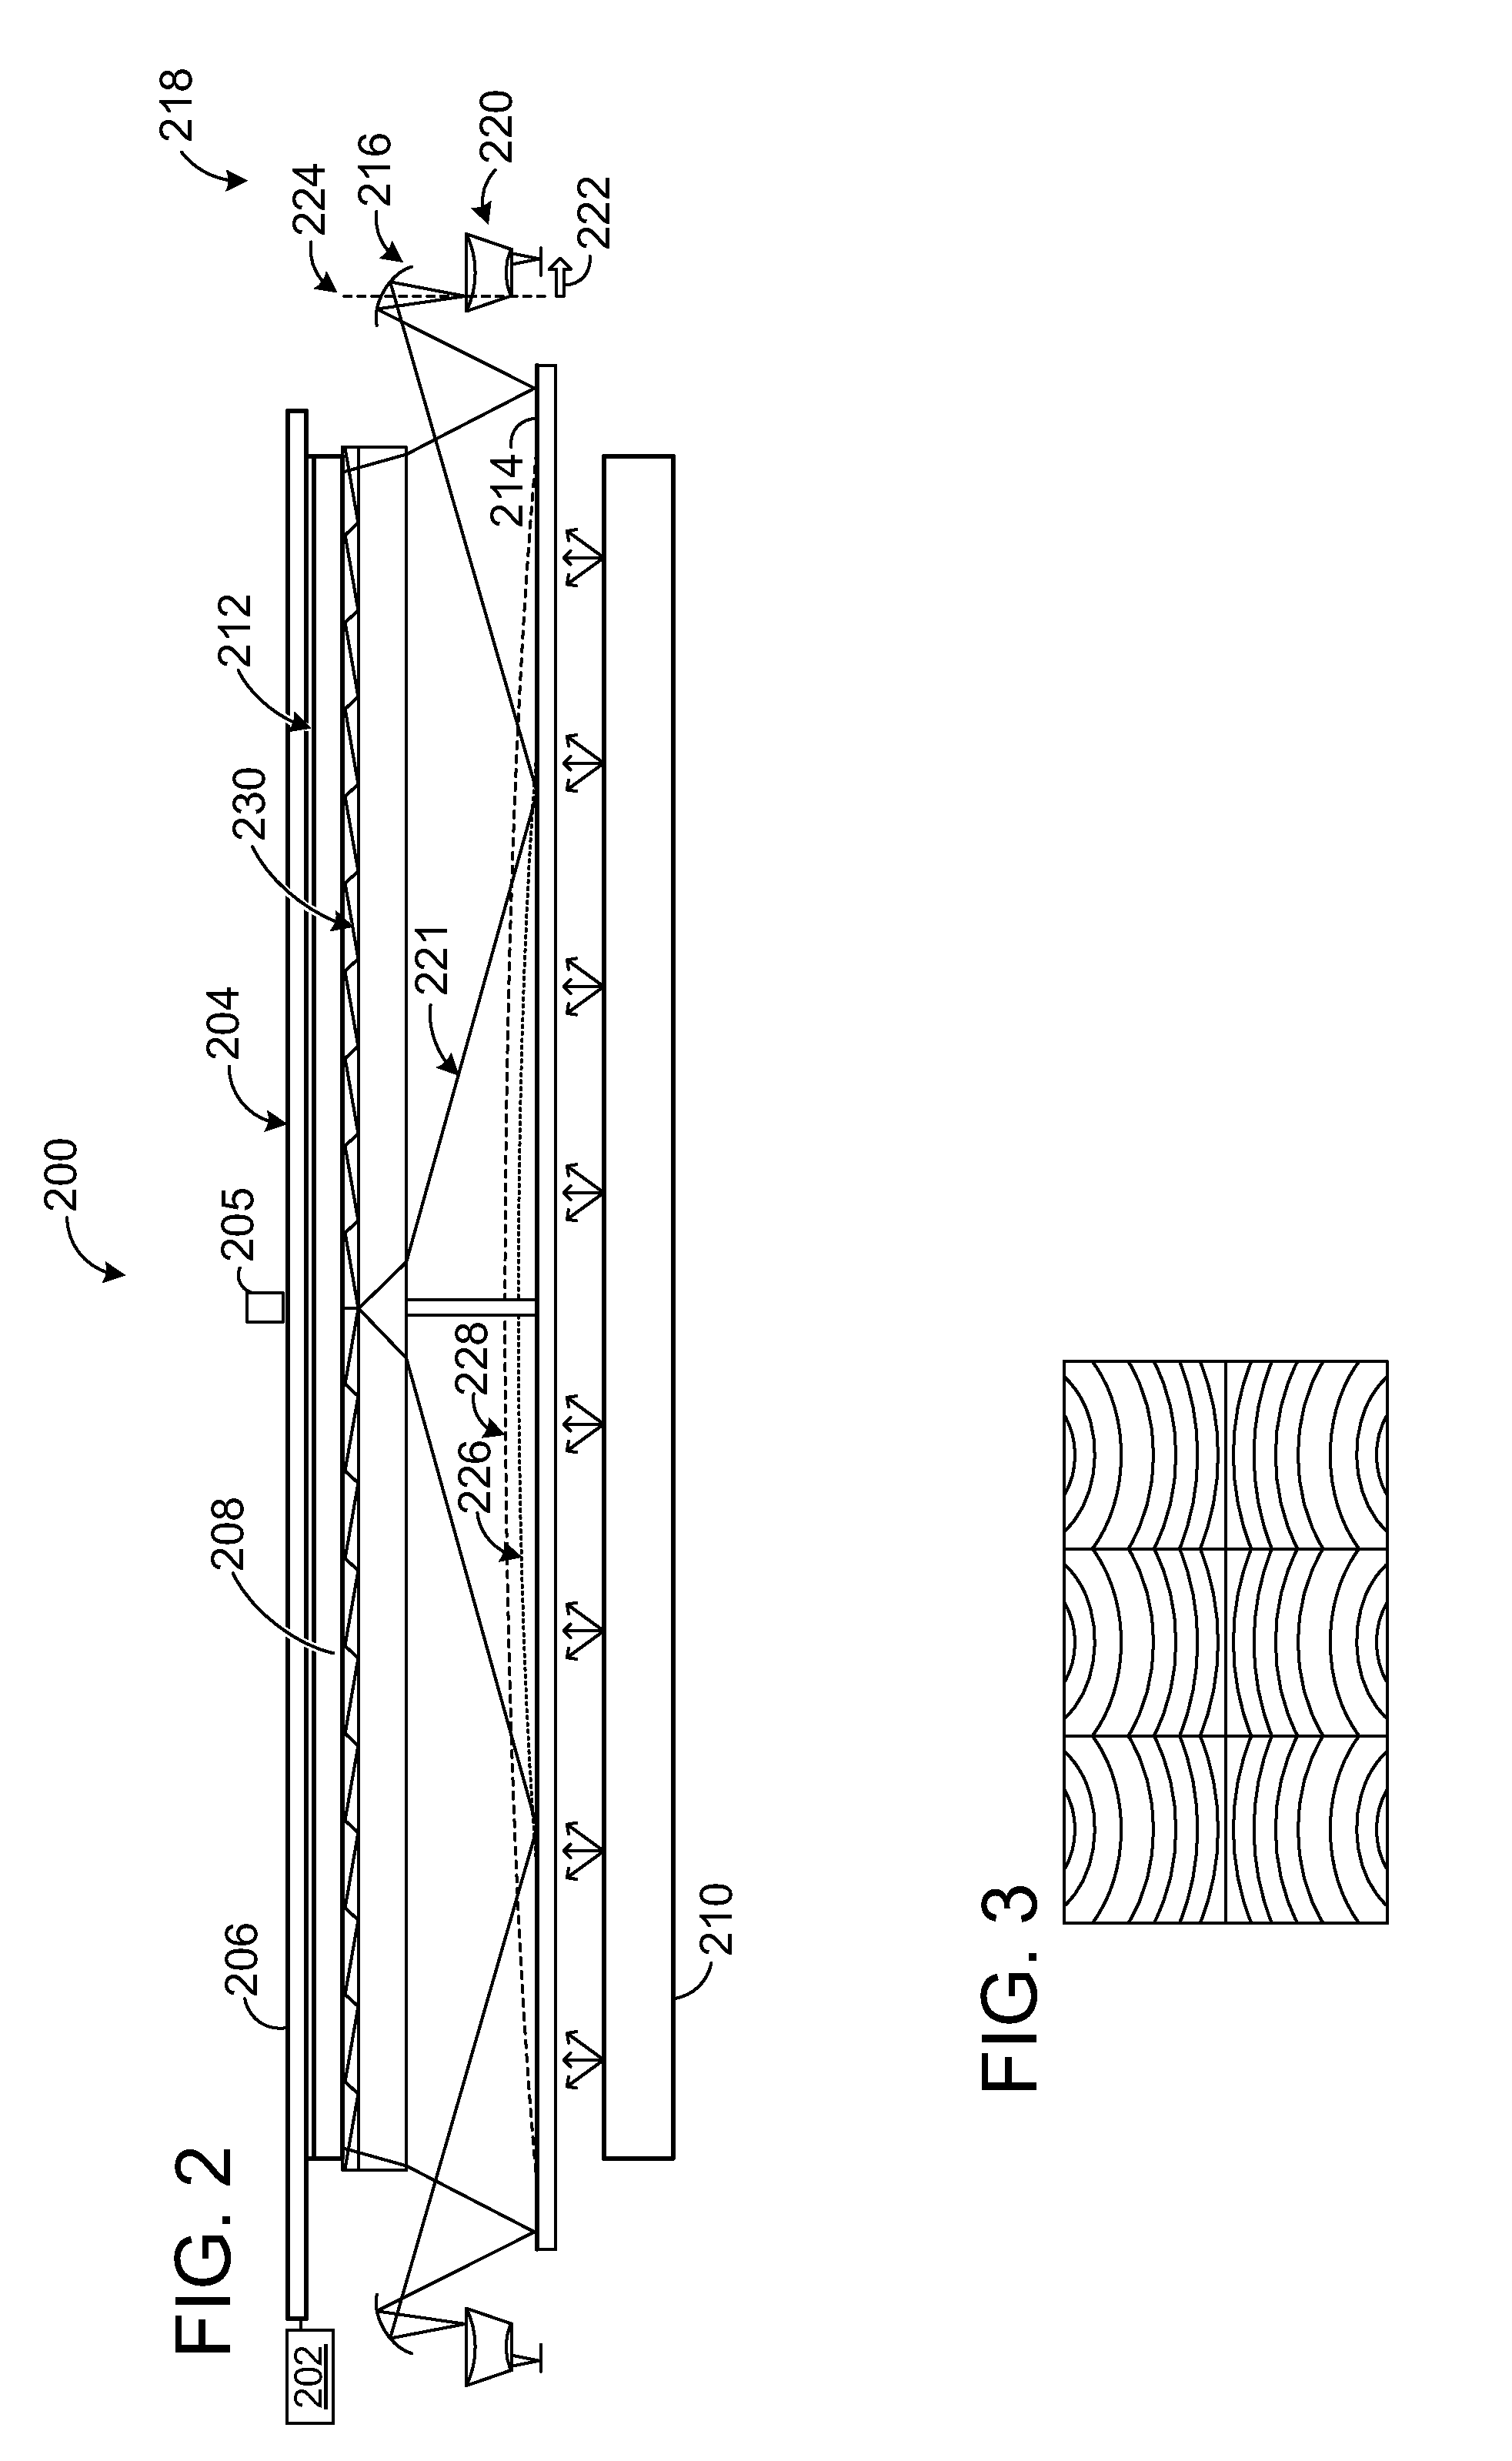 Infrared vision with liquid crystal display device